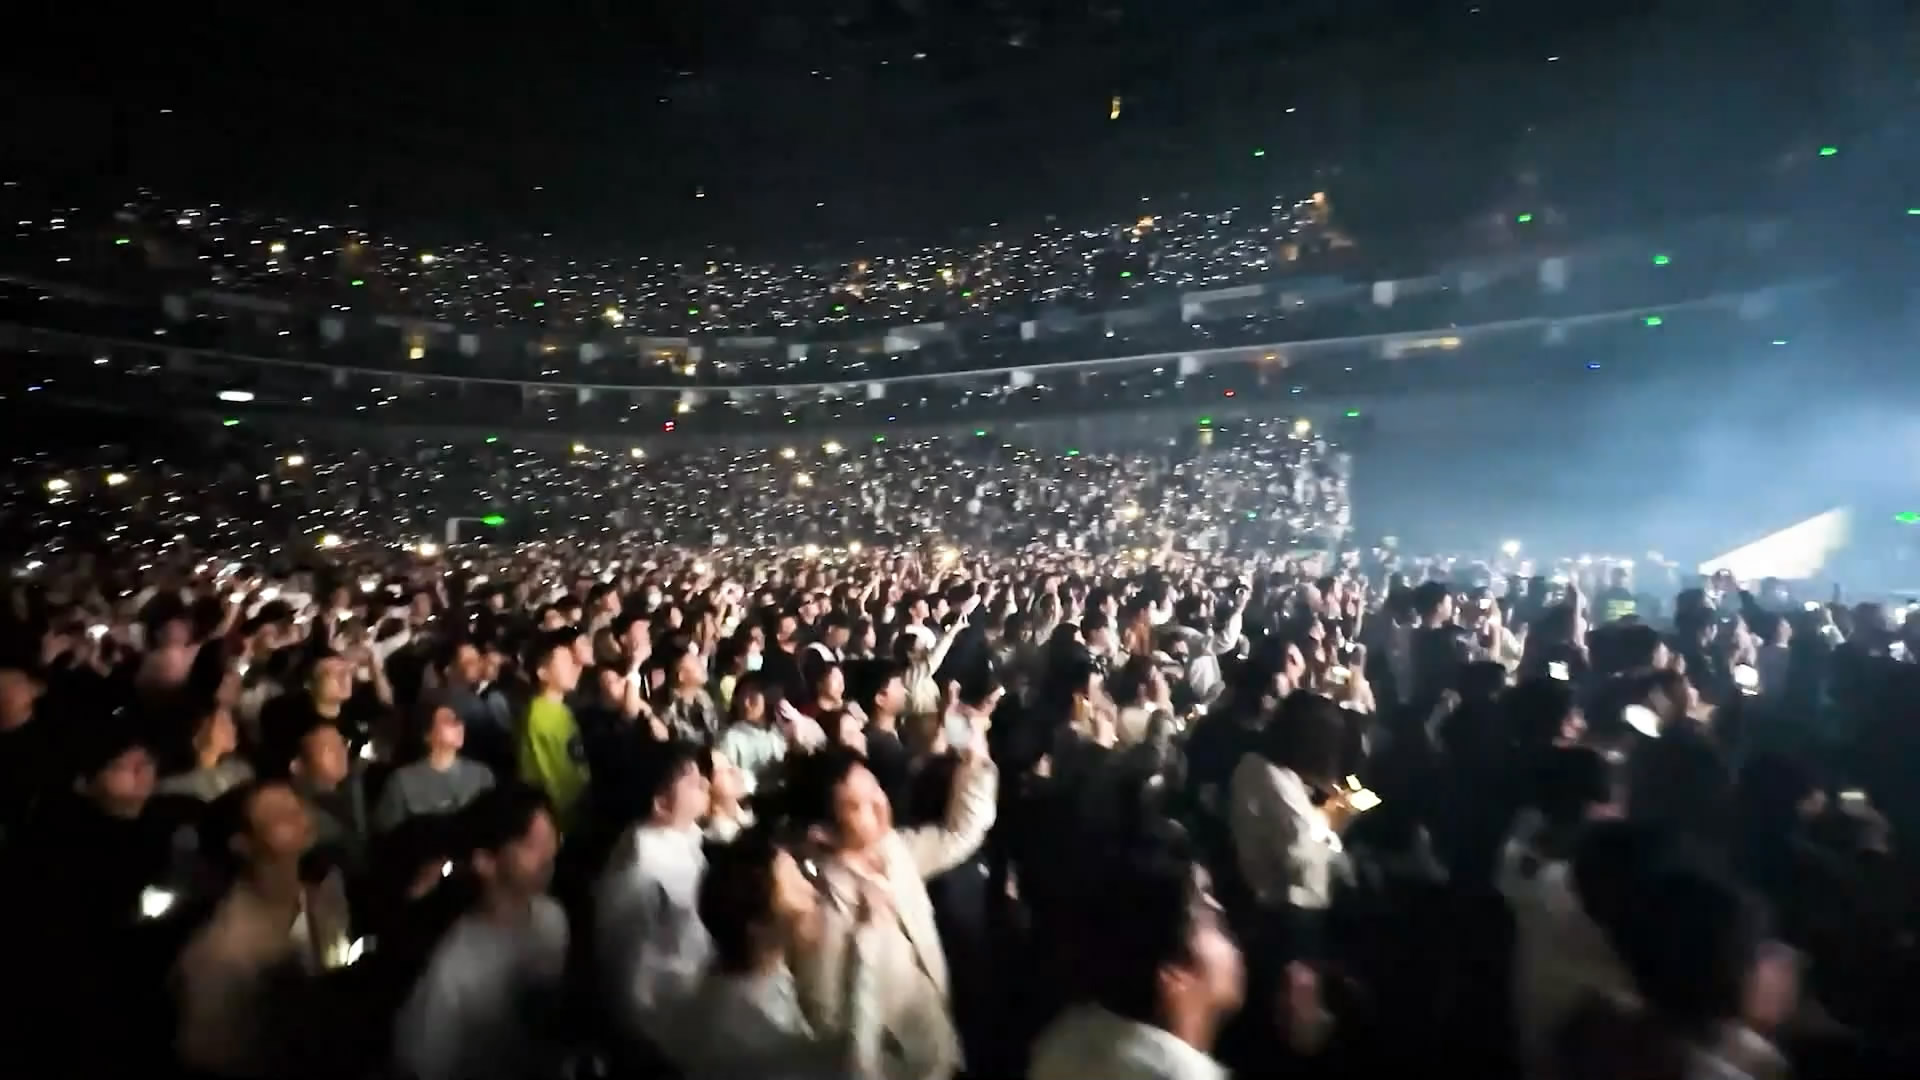 Fans in China pack out an Alan Walker concert. /Screenshot of footage provided to CGTN